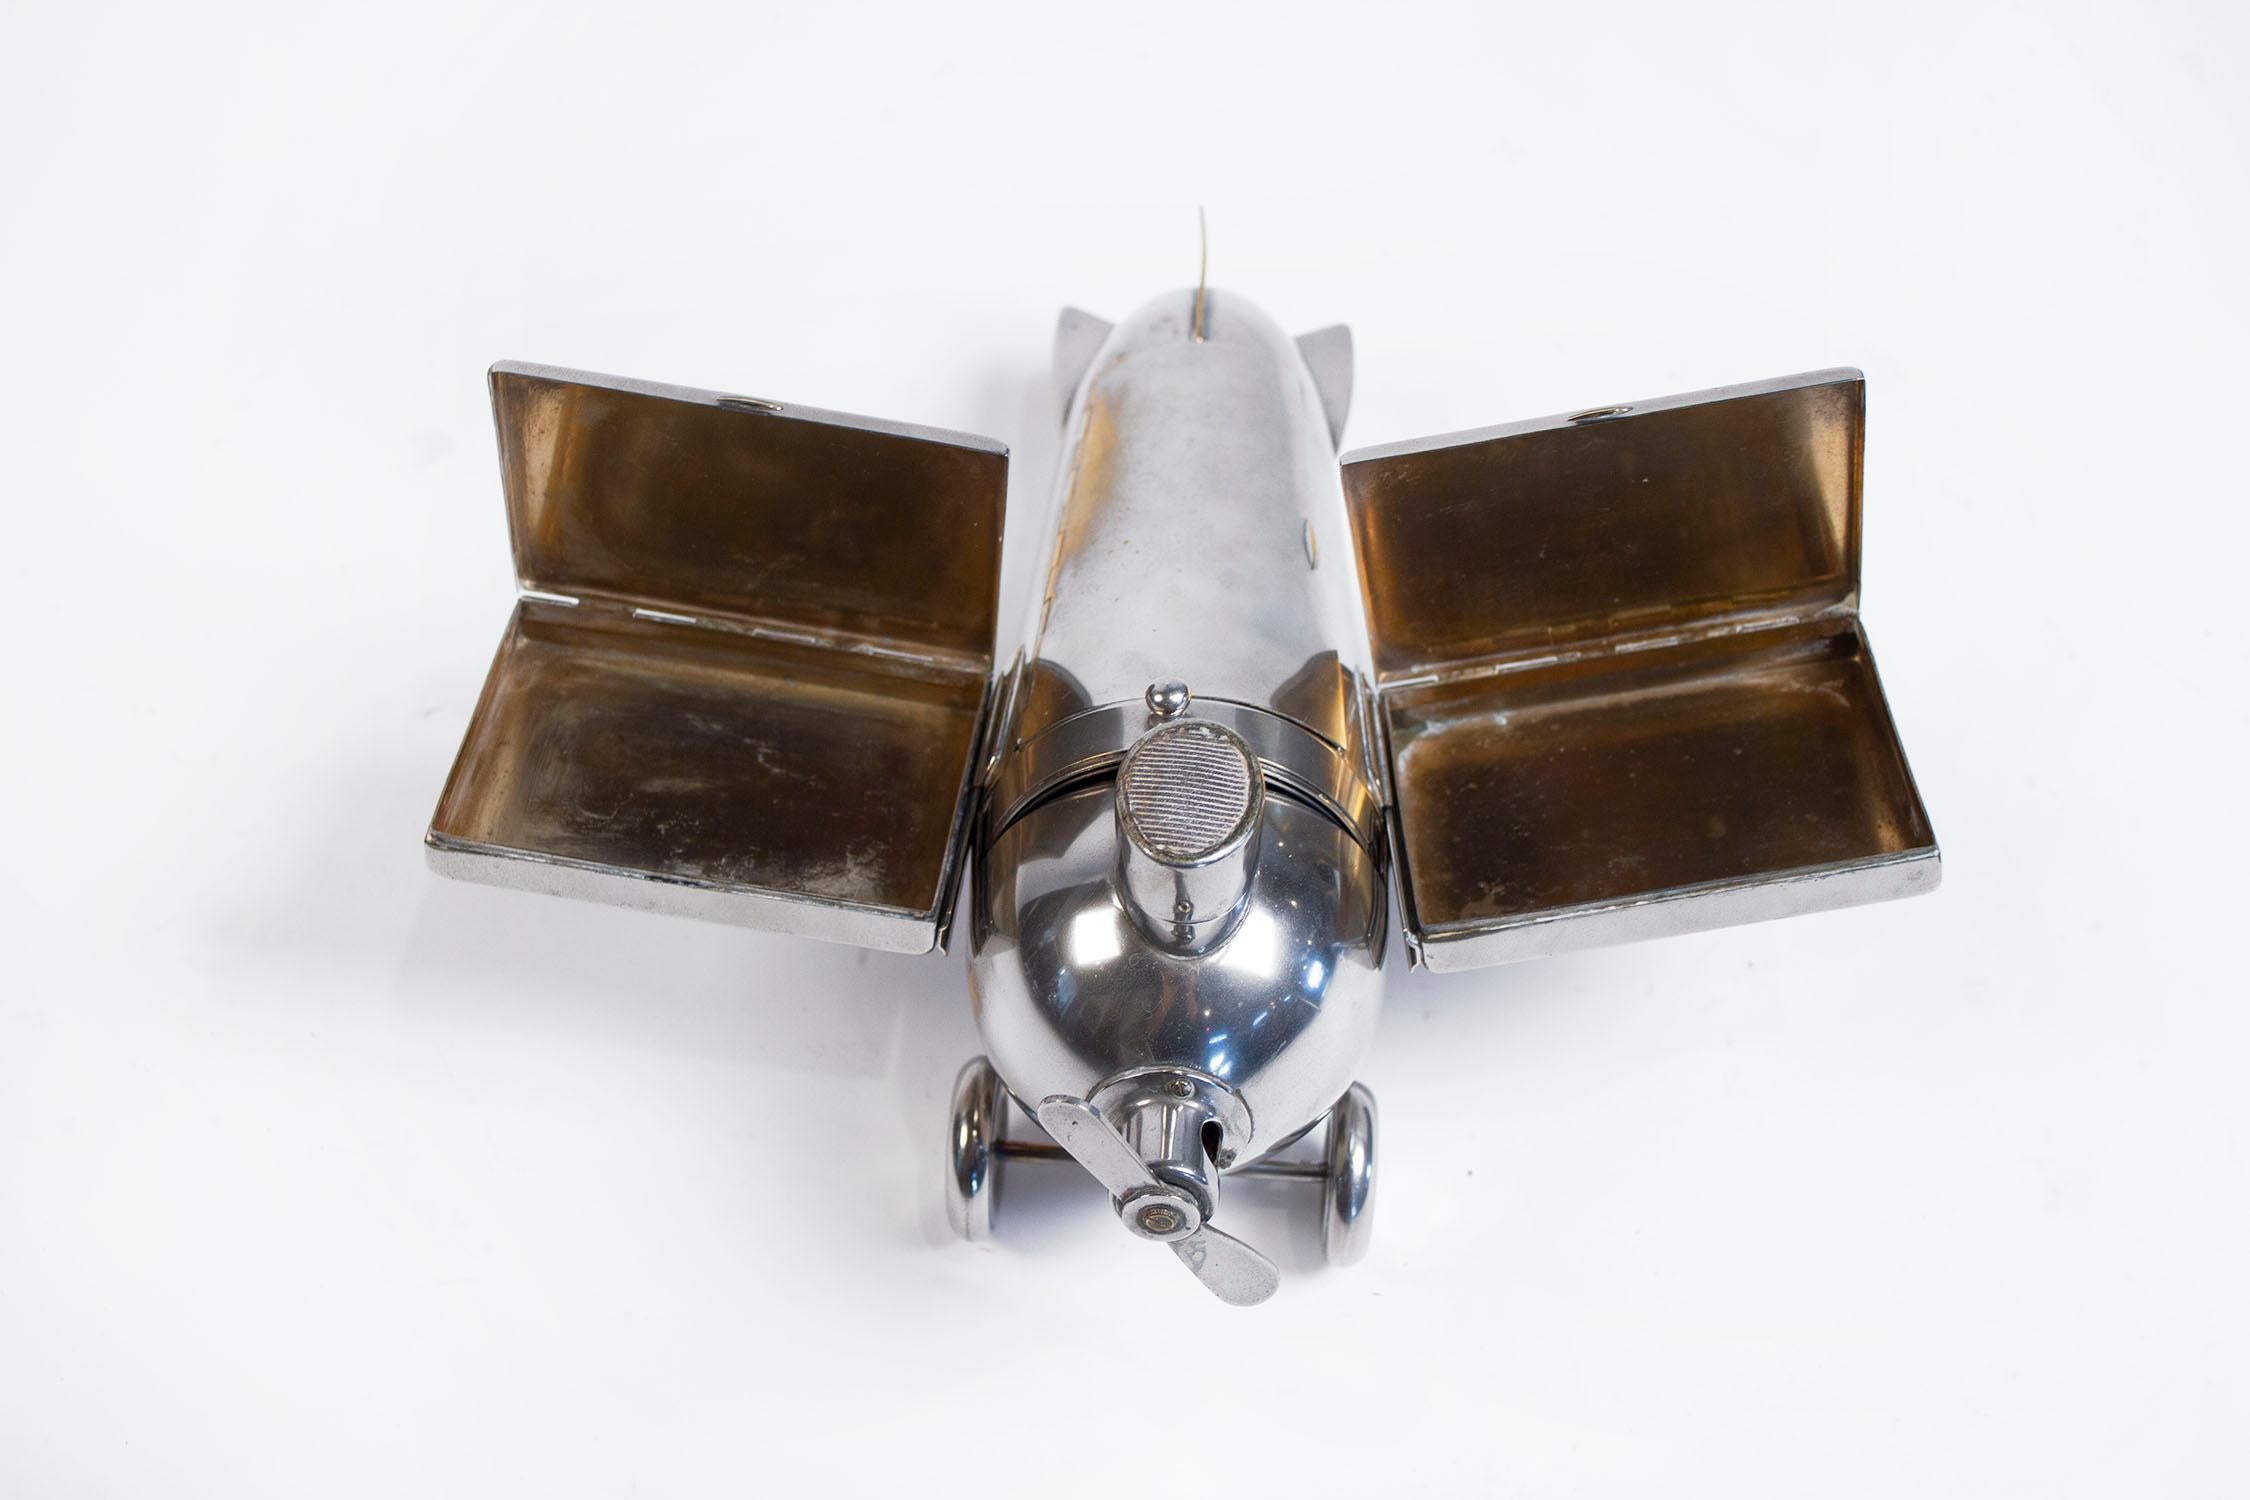 Brass Art Deco Airplane Smoker's Set by J.A. Henckels 1930s For Sale